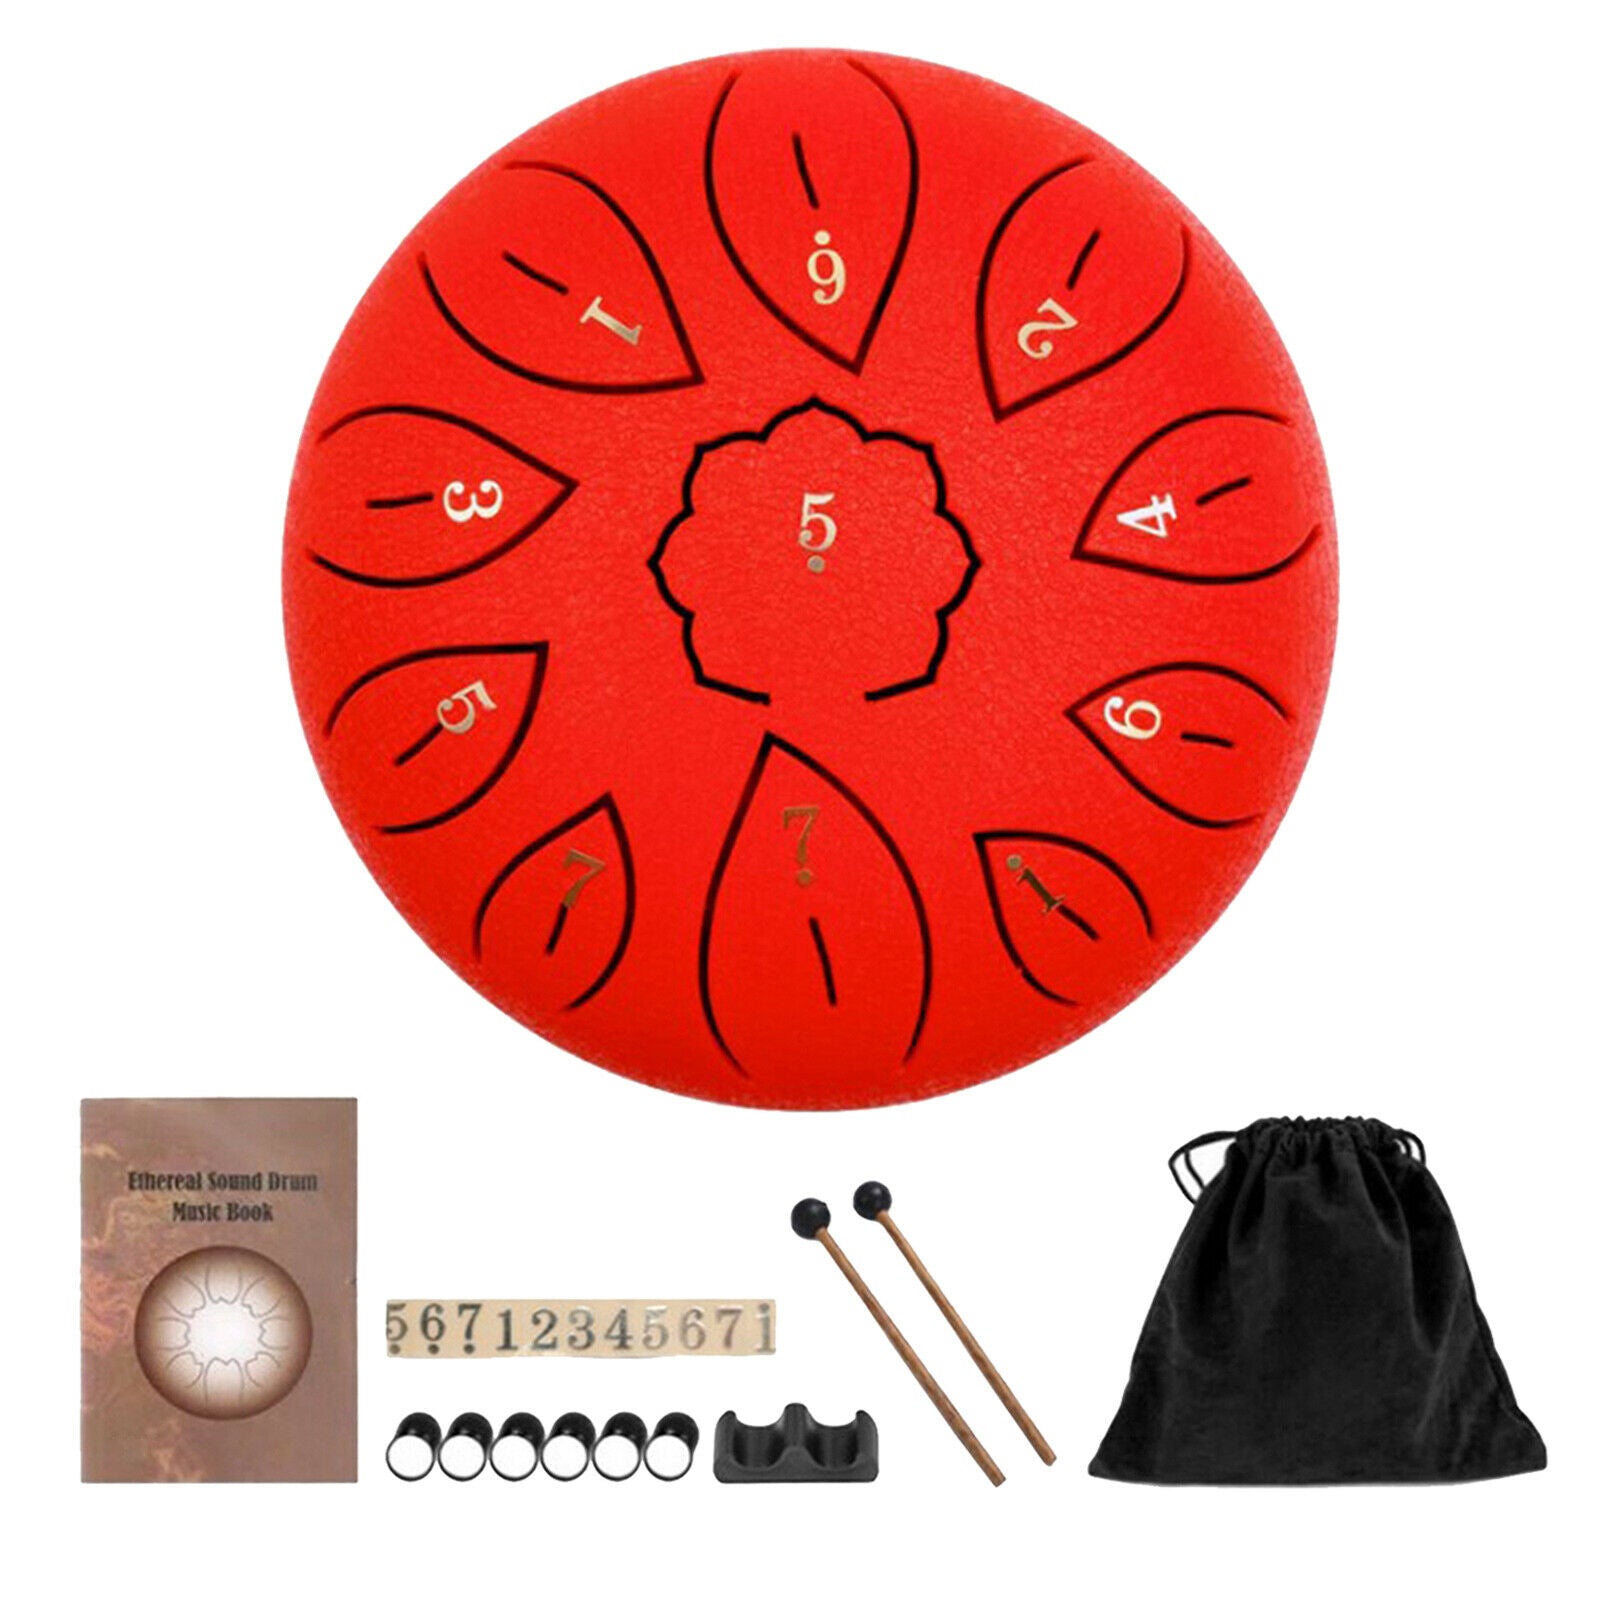 11 Steel Tongue Drum Hand Pan with Drum Mallets Gift for Adults Kids red